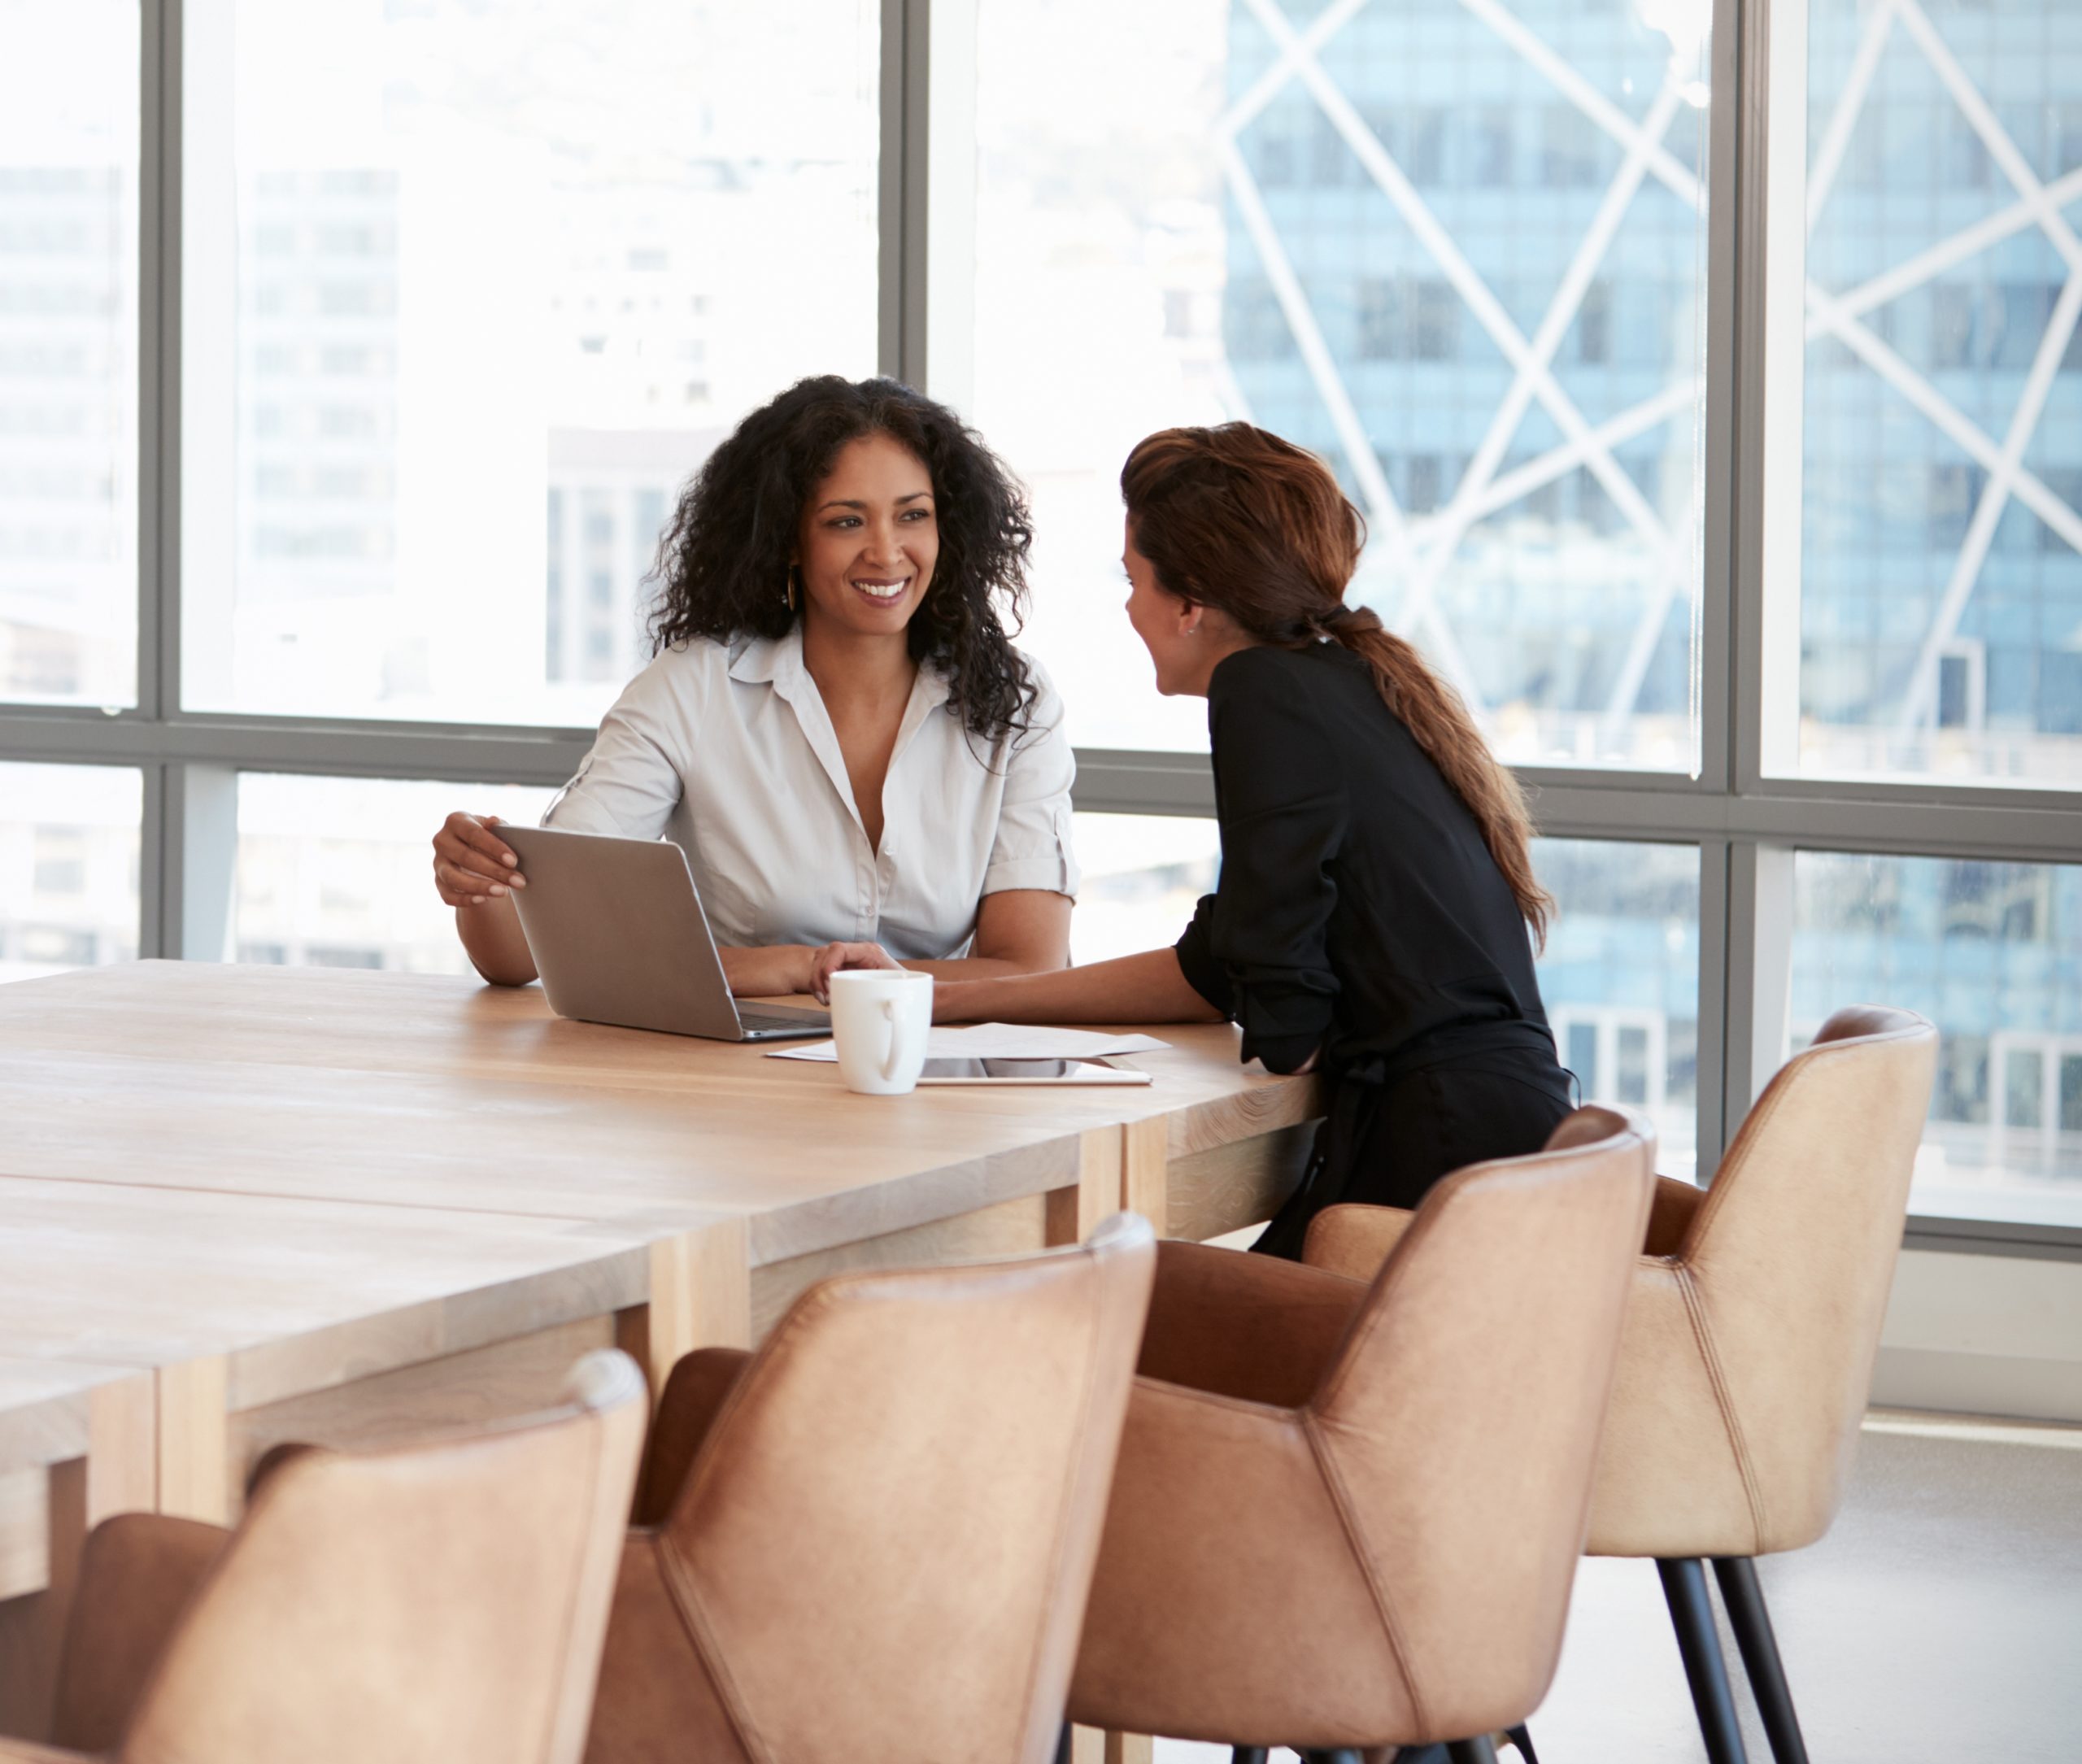 Two Women Speaking at an Office Conference Room Table